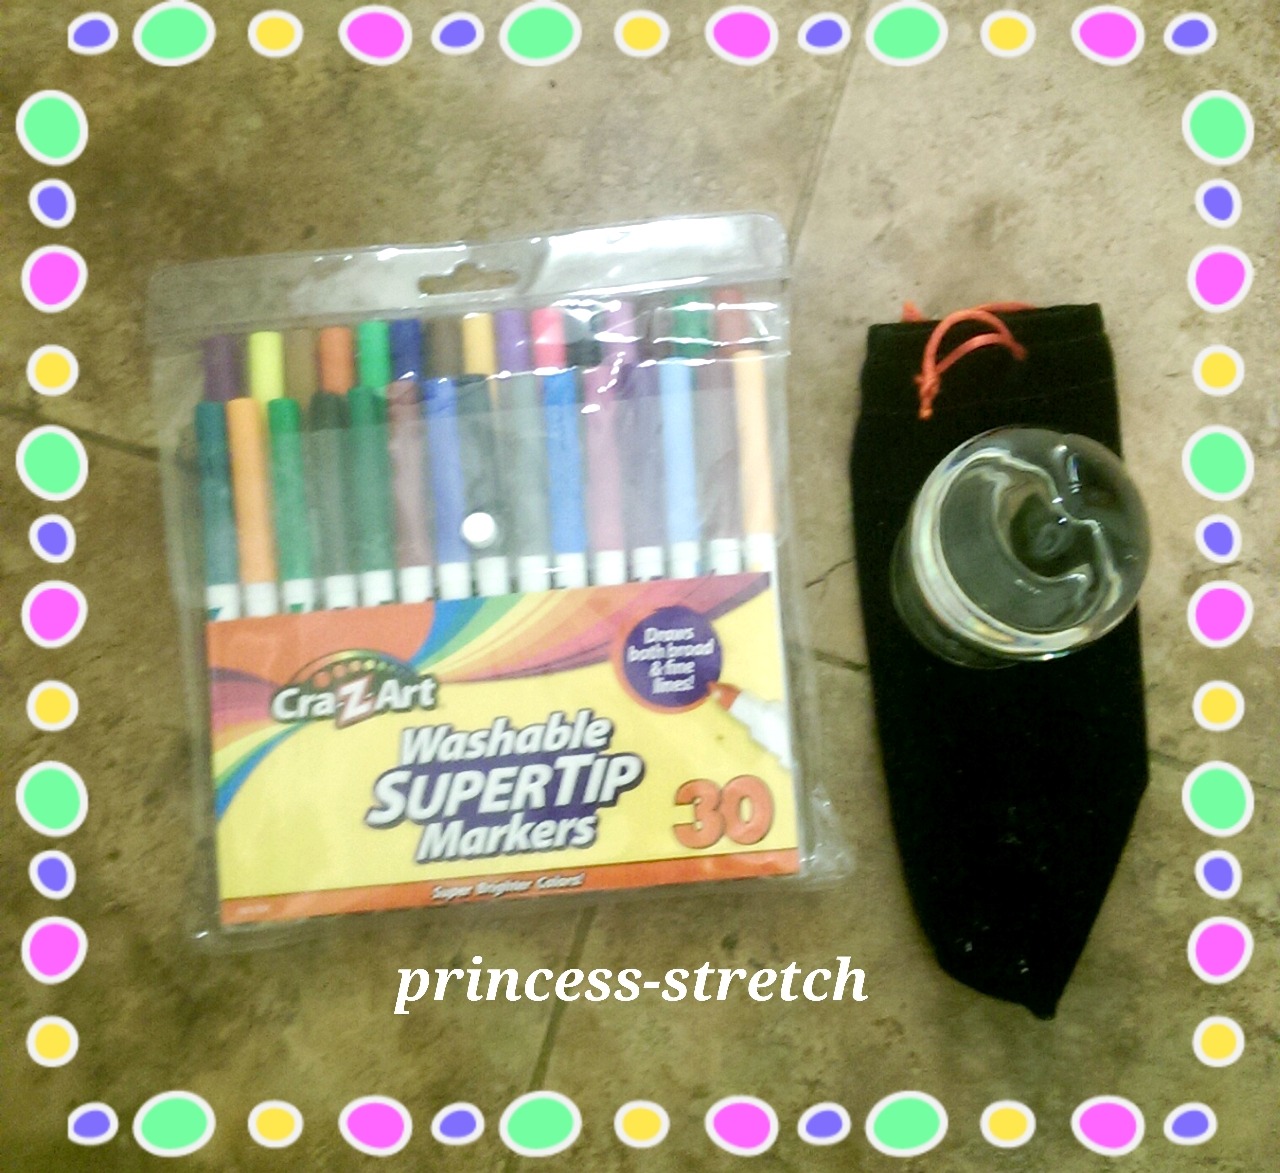 princess-stretch: I finally did the marker challenge! And it’s all thanks to my